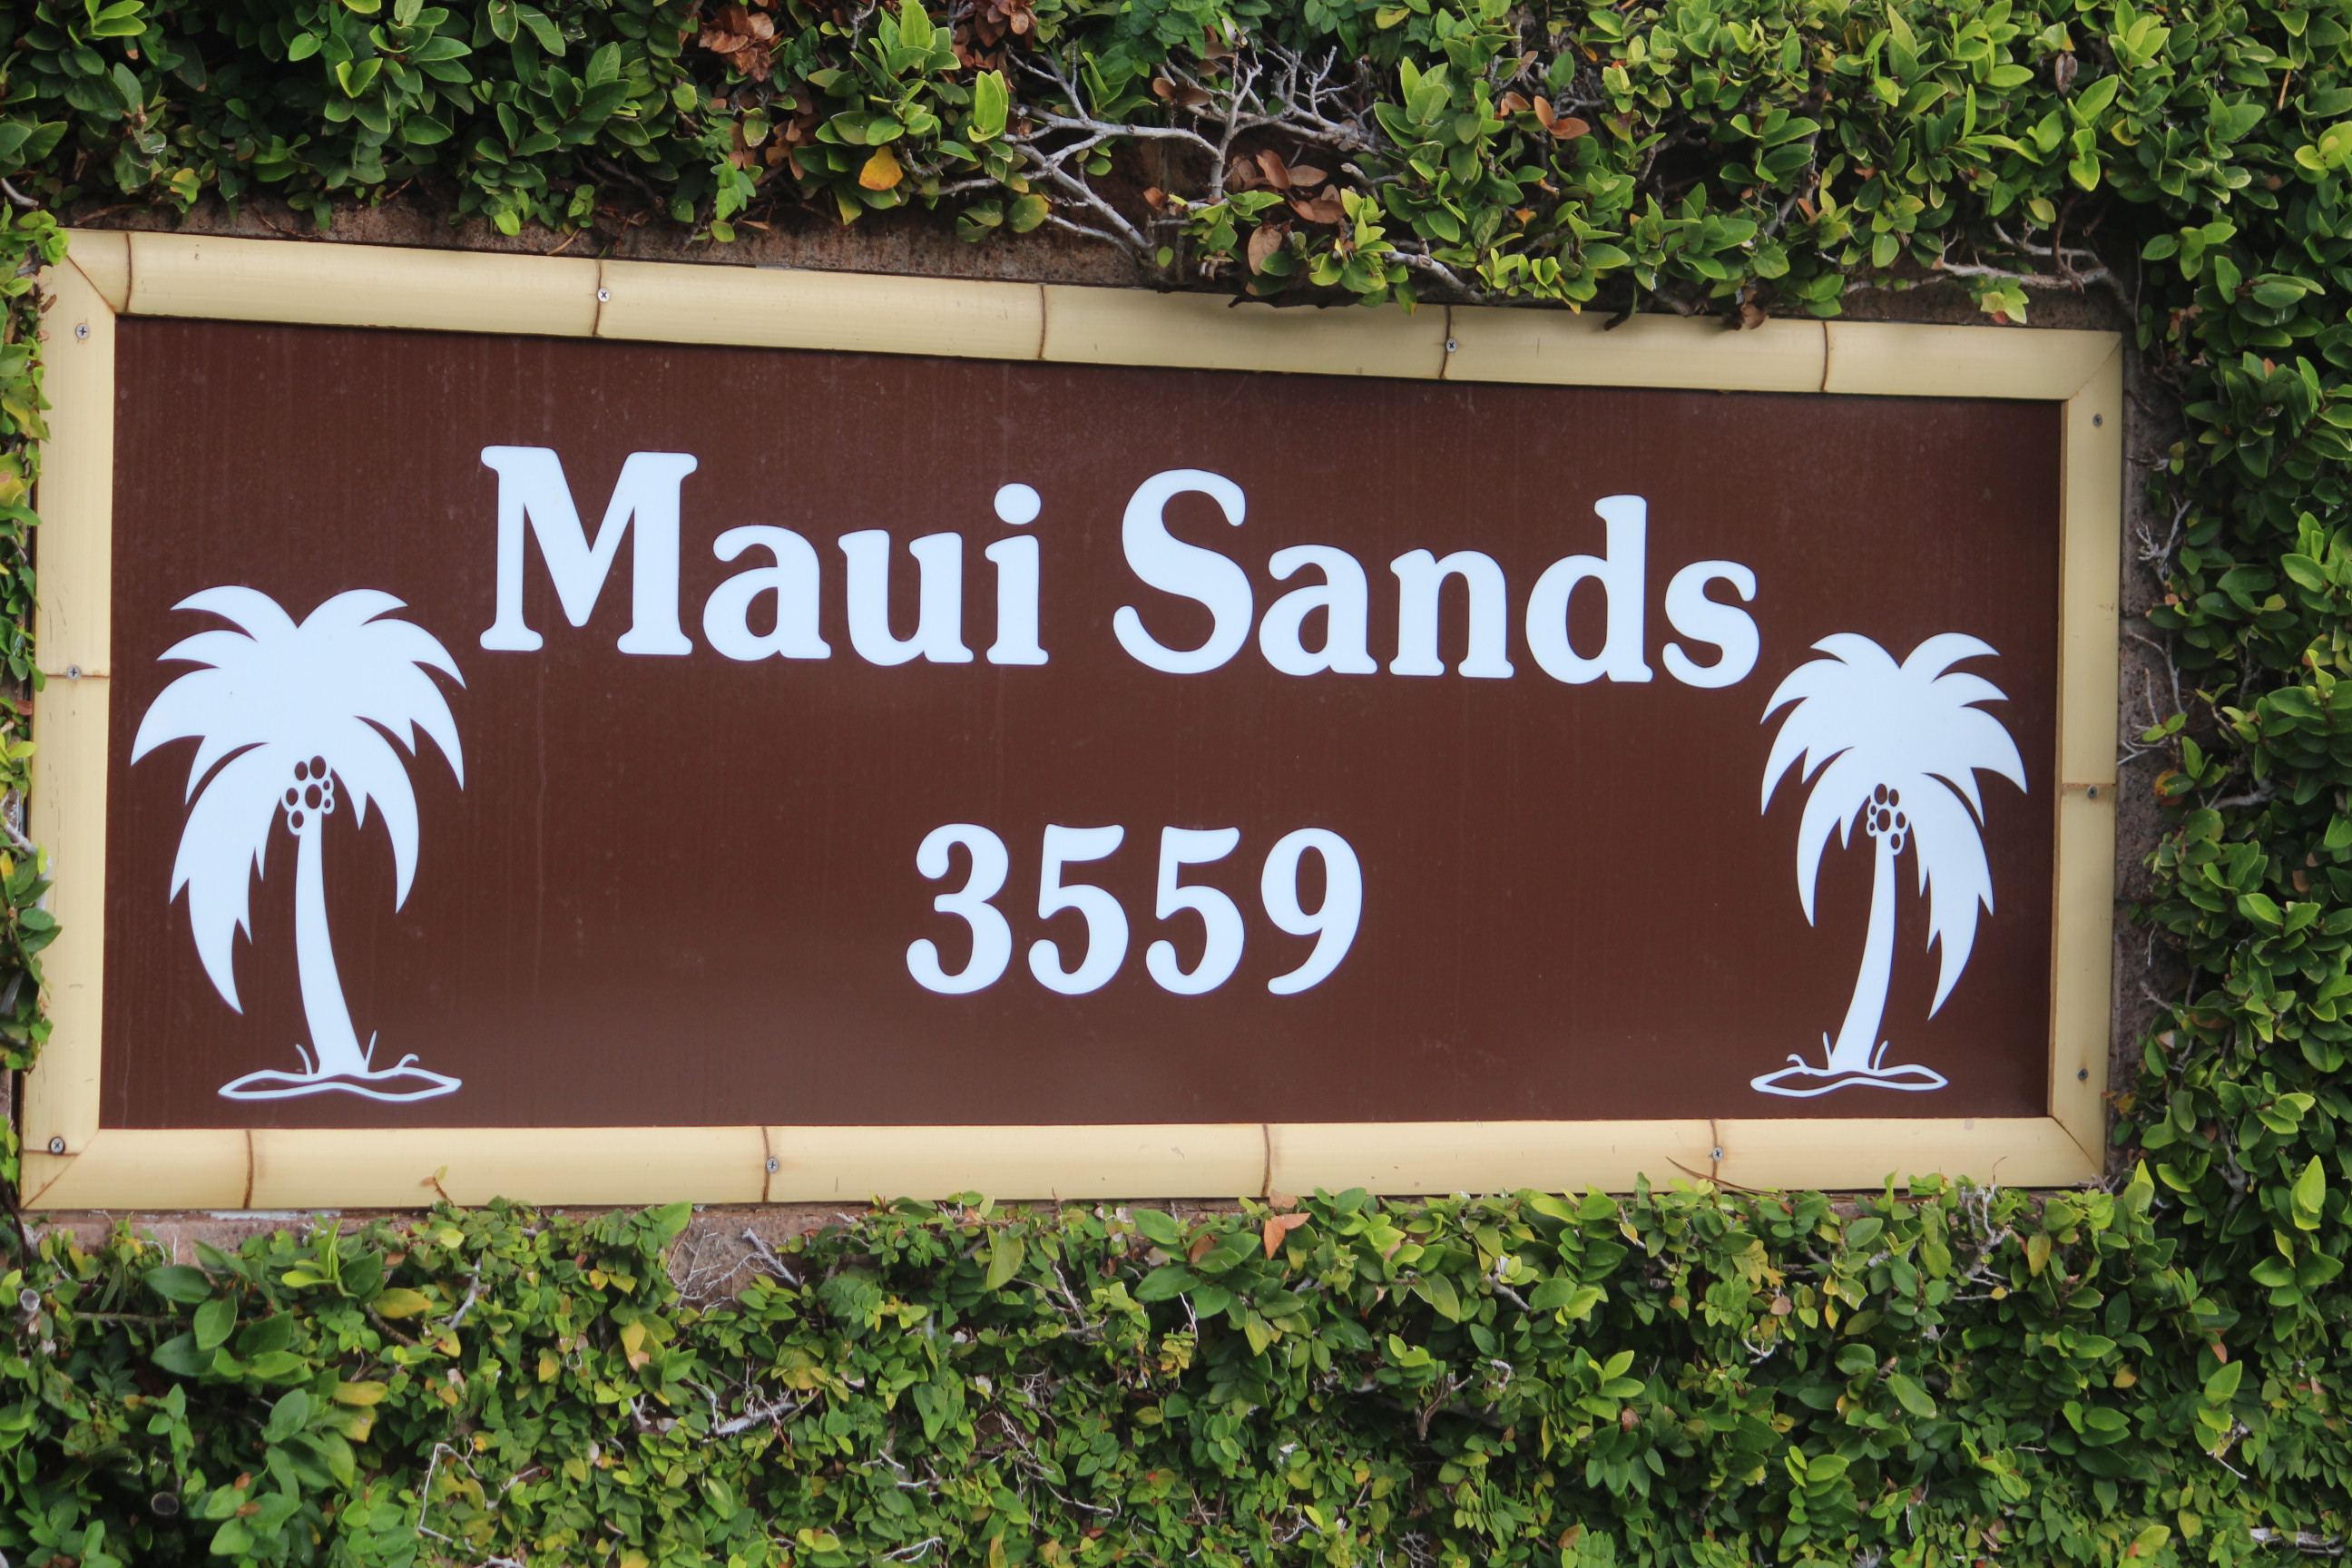 Image of the sign at the entrance to Maui Sands